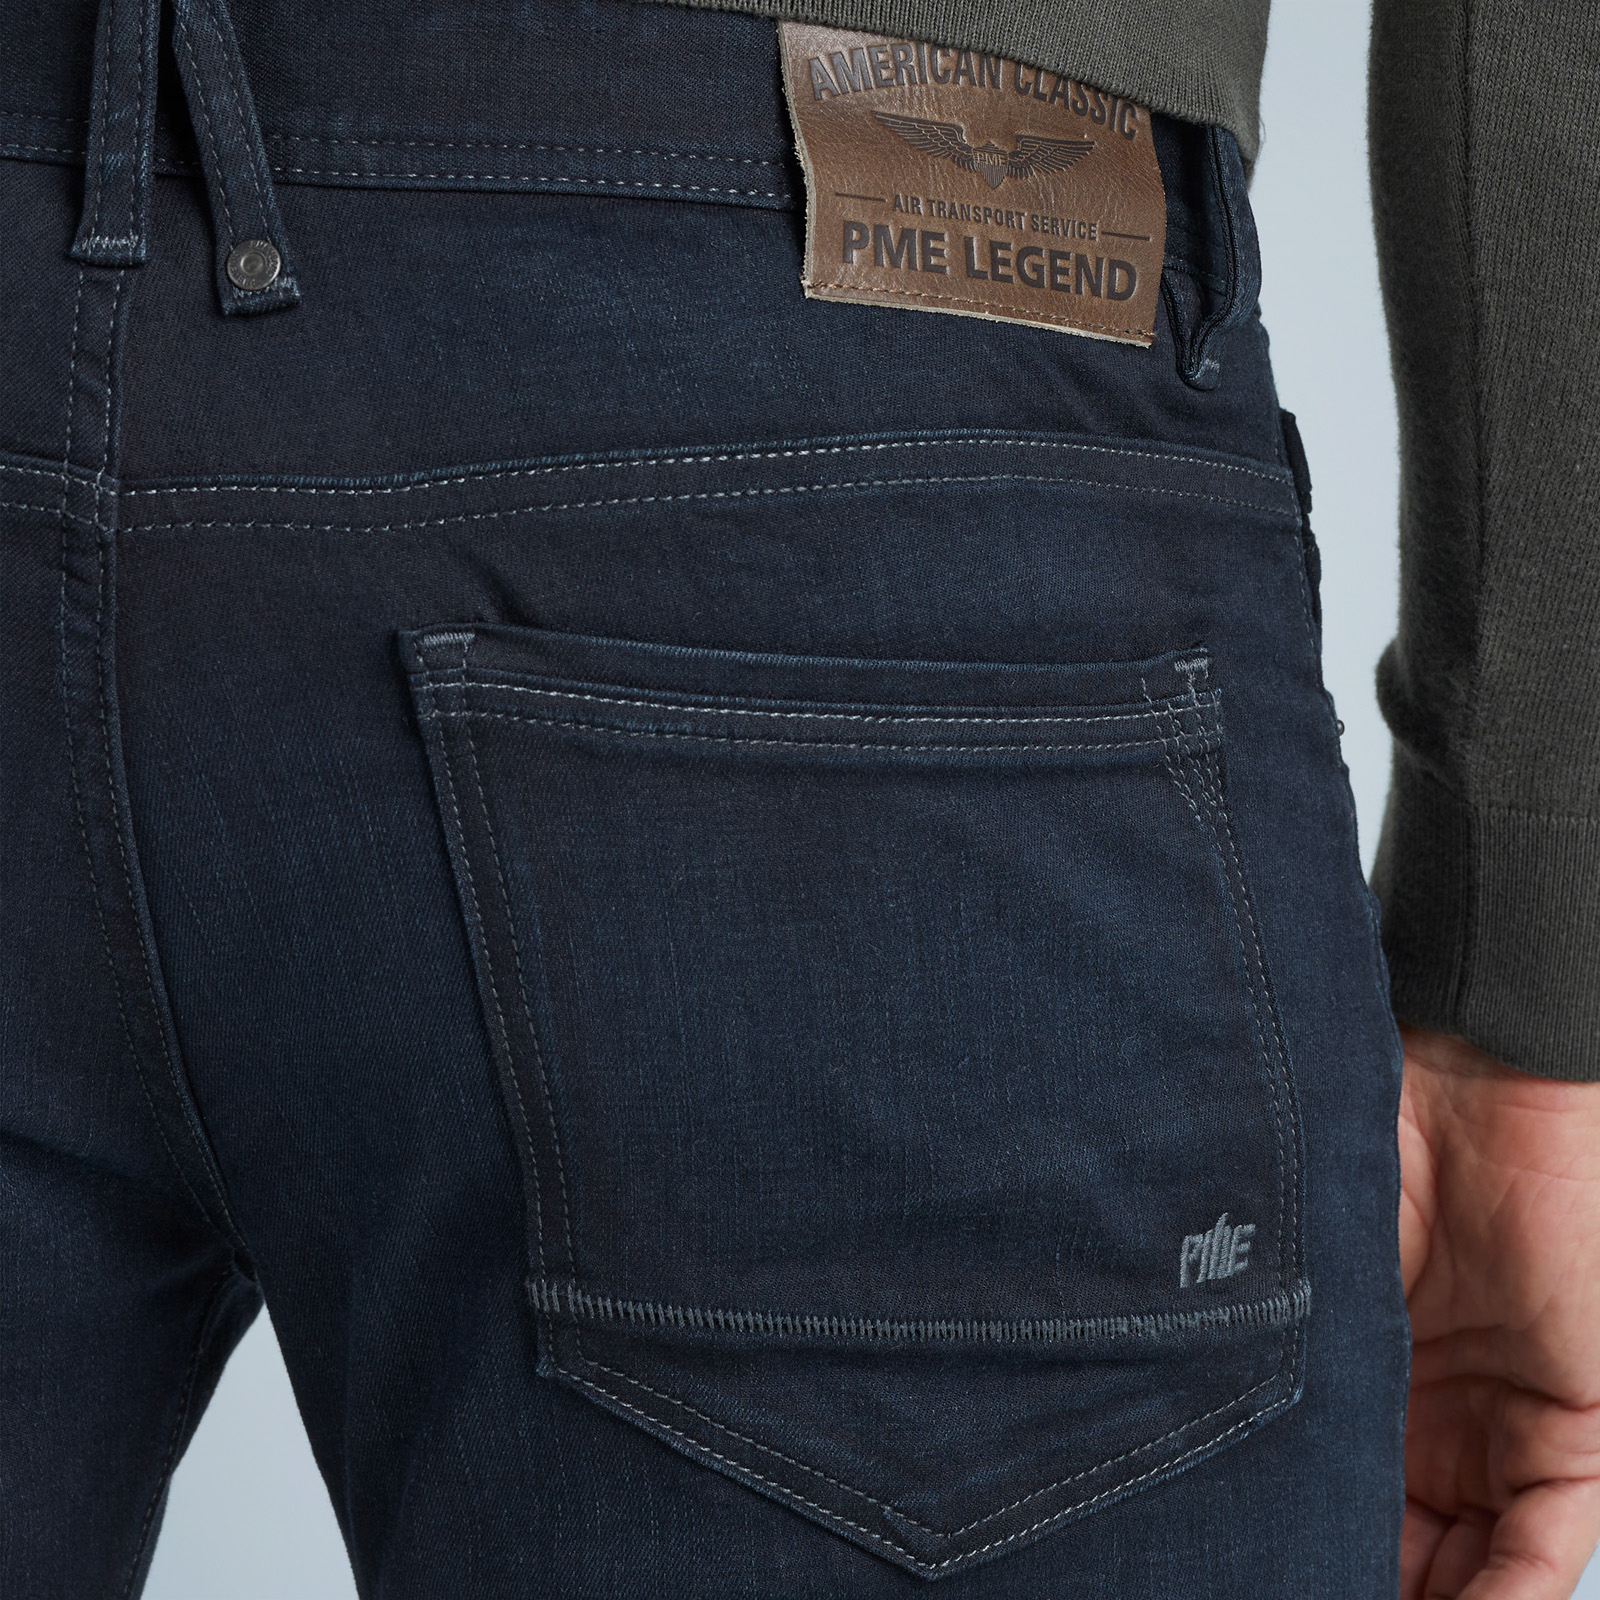 PME LEGEND | Tailwheel slim fit jeans | Free shipping and returns